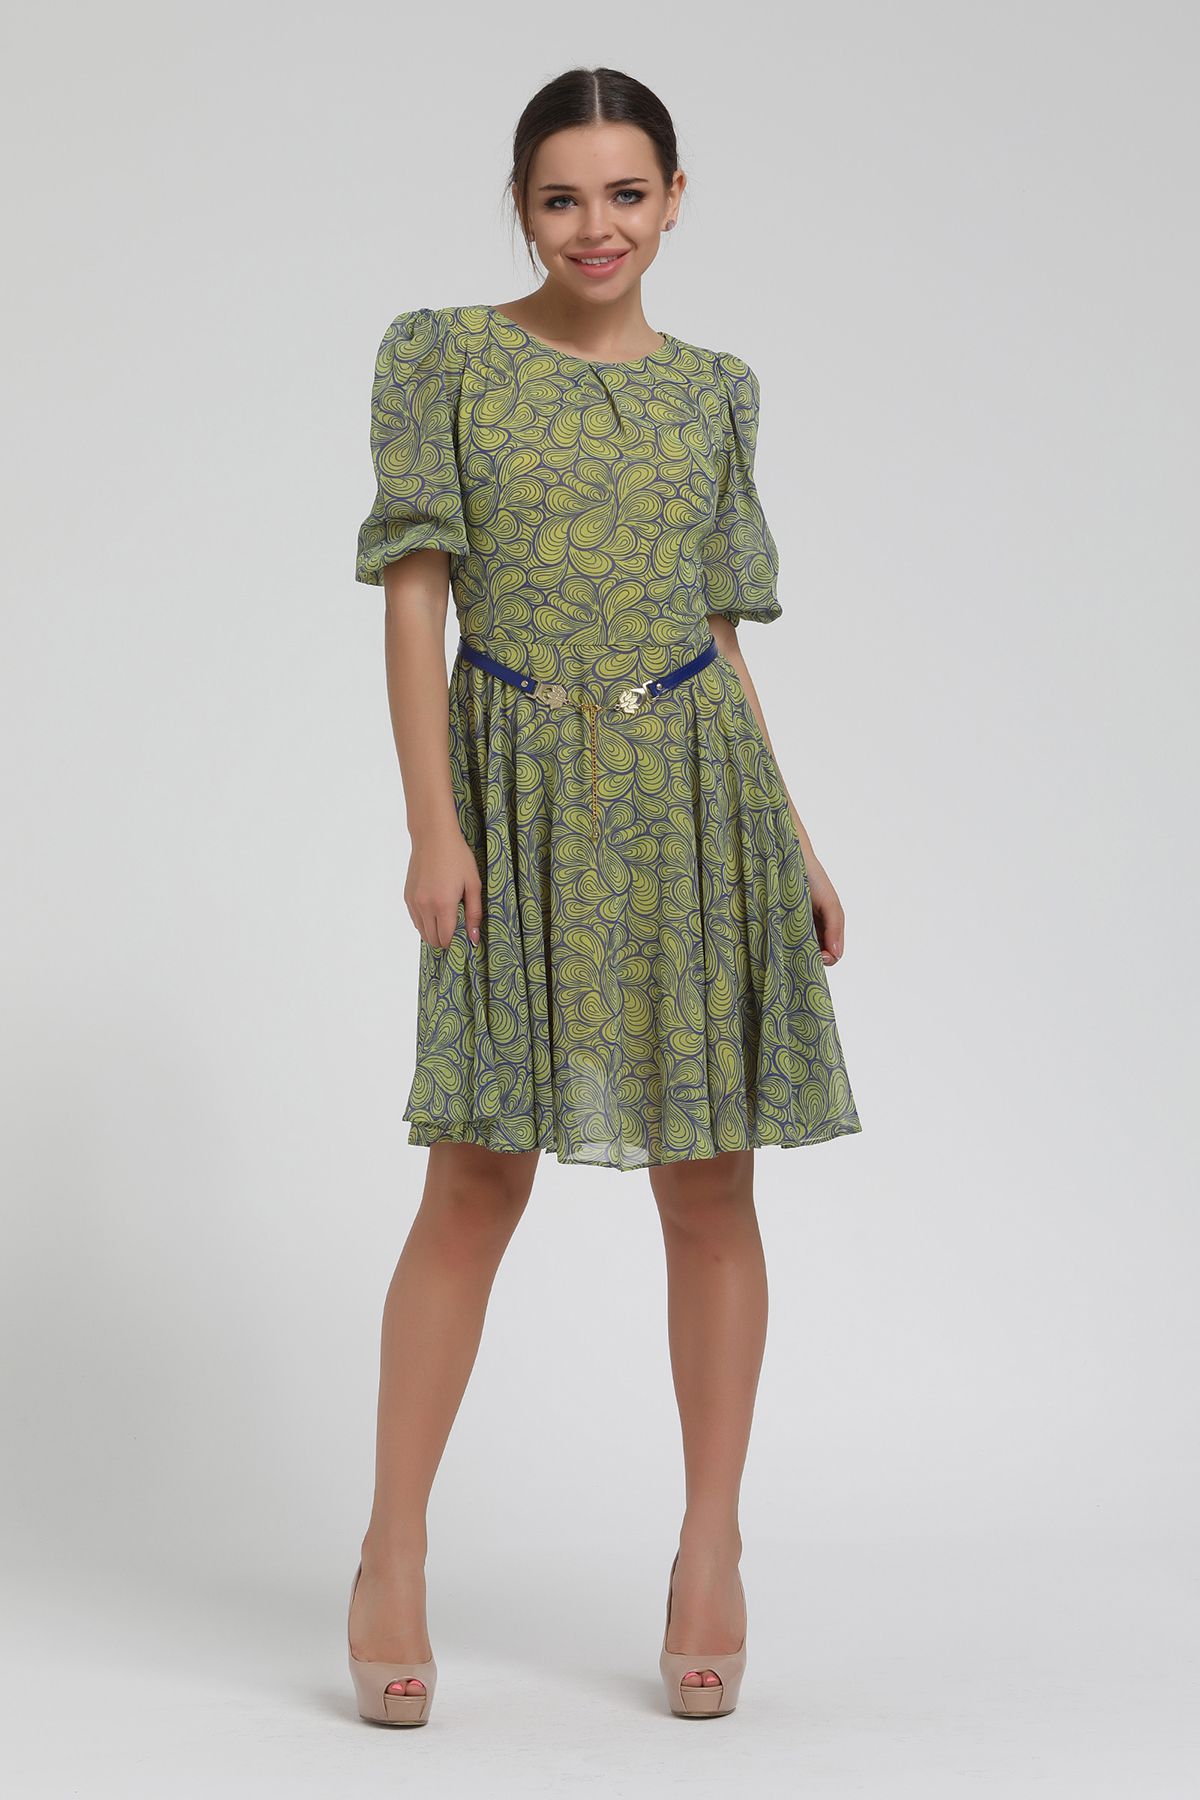 Picture of leaf Printed Watermelon Sleeve Short Dress